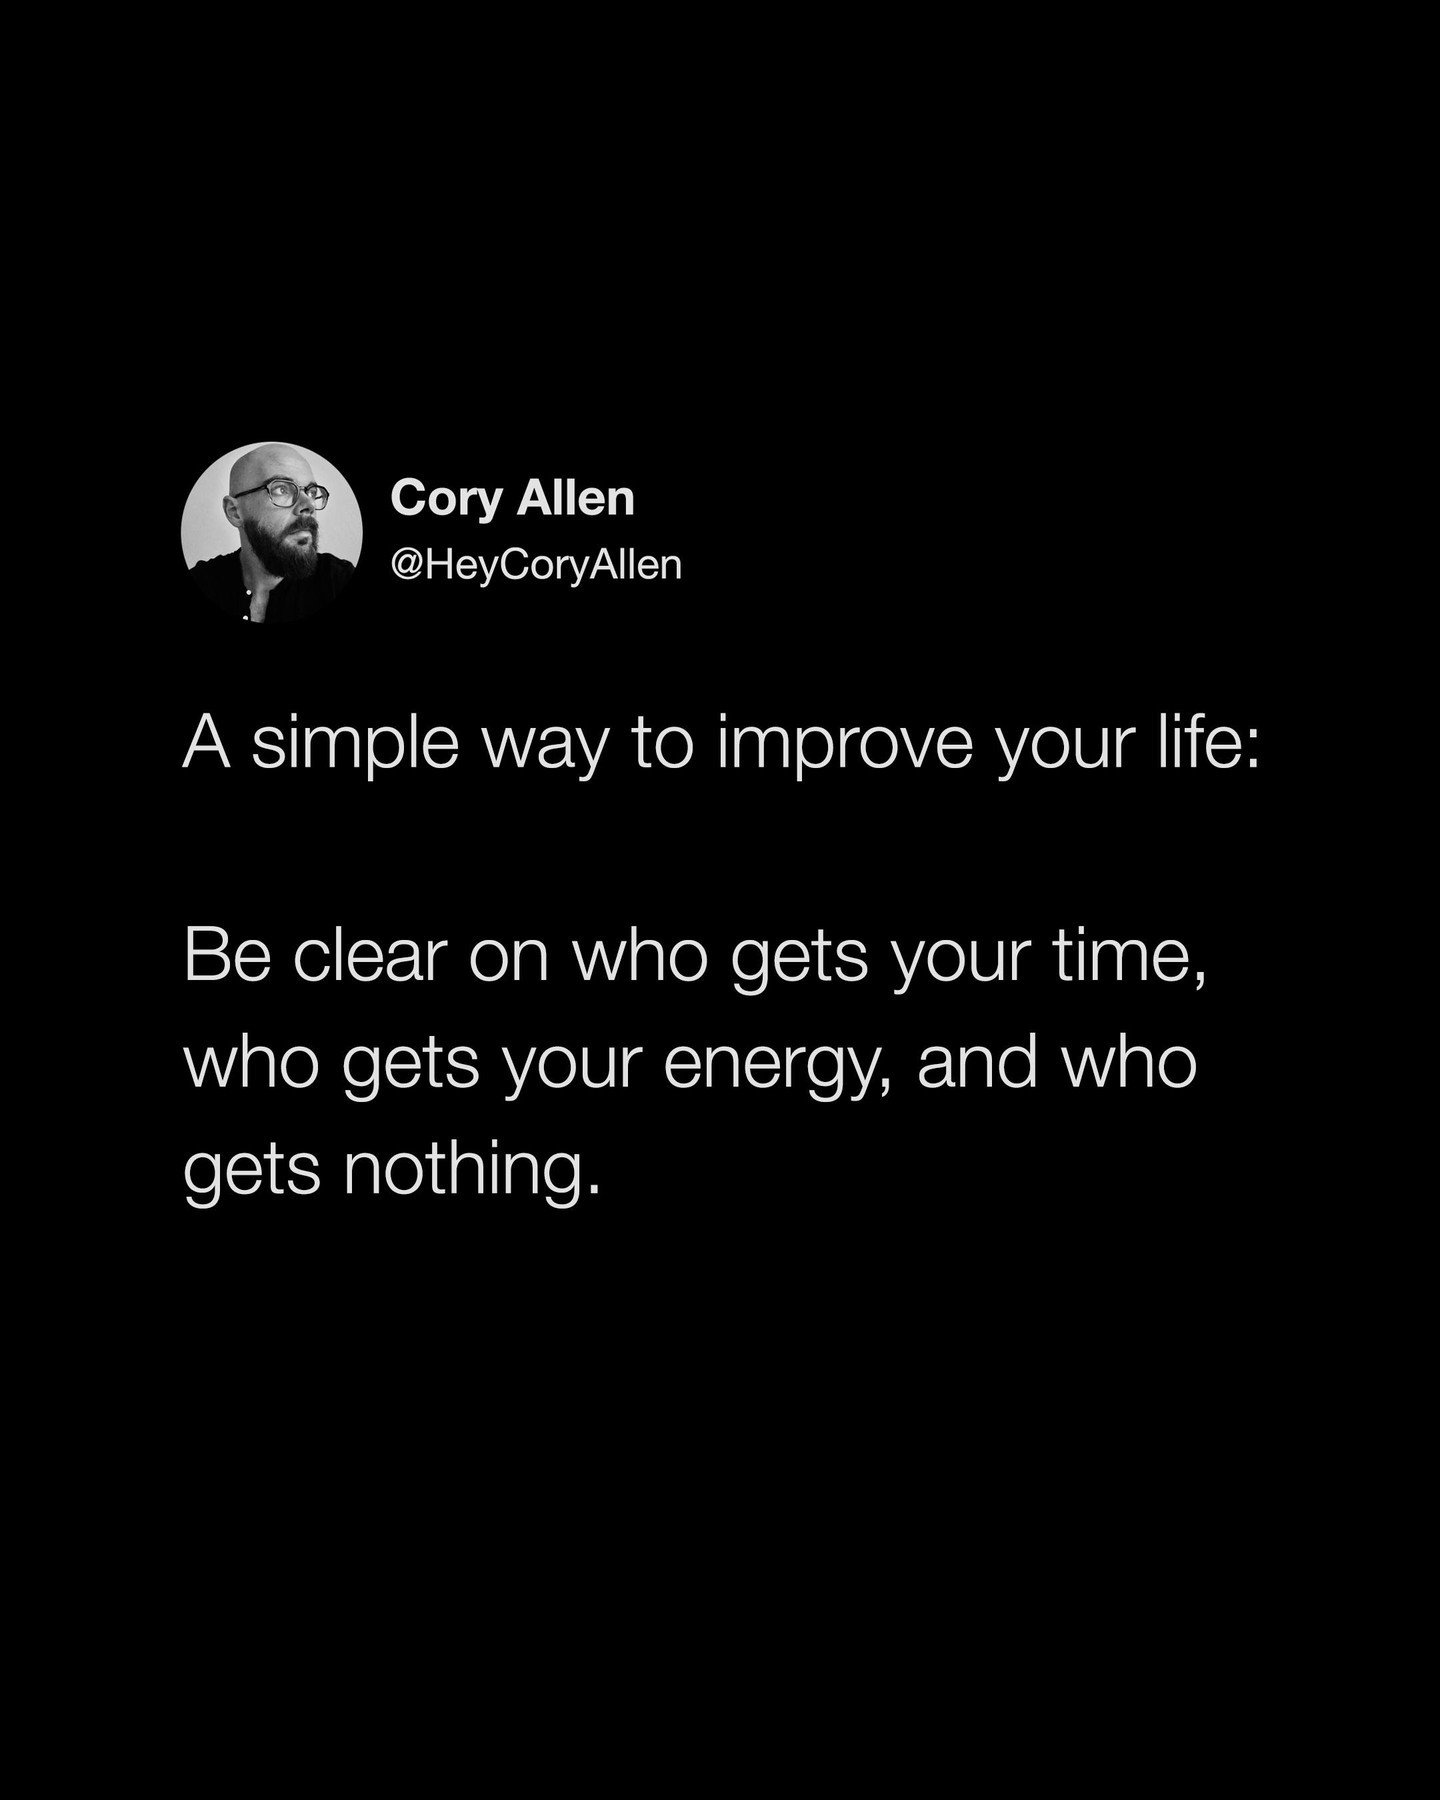 Often the simplest changes create the biggest results 🙏🏻

@heycoryallen: A simple way to improve your life: Be clear on who gets your time, who gets your energy, and who gets nothing.